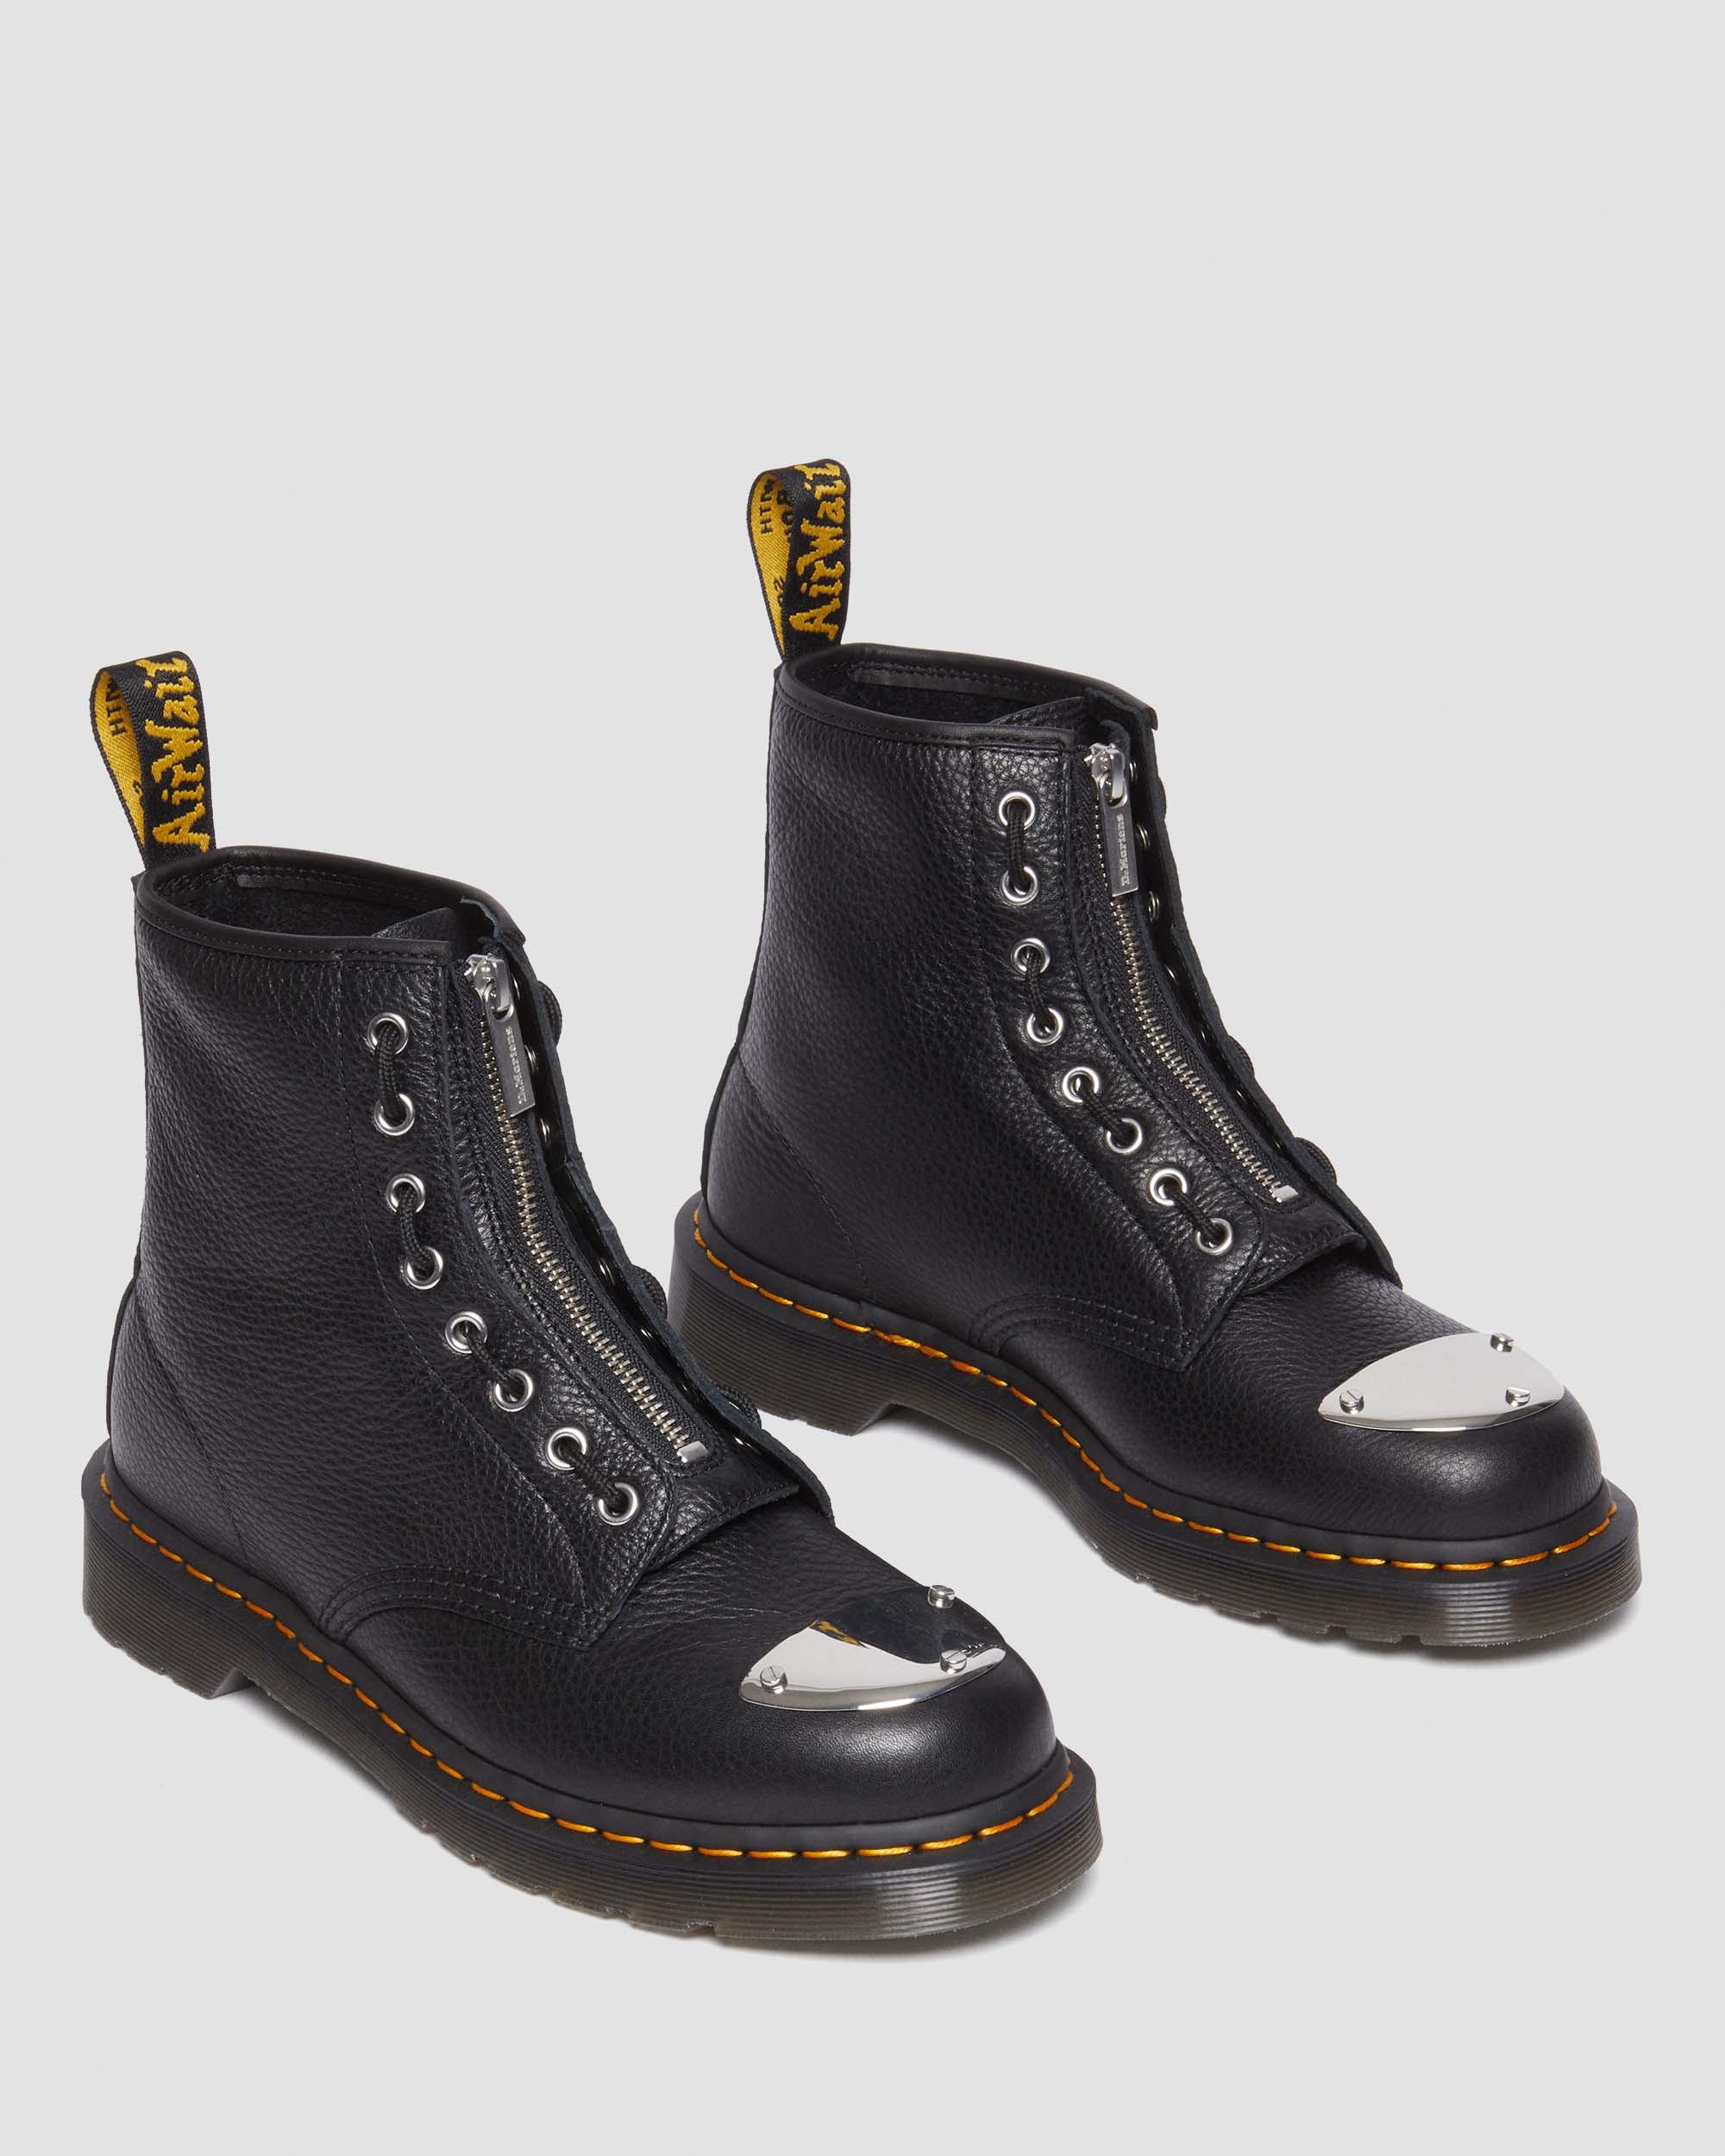 1460 Toe Plate Lunar Leather Jungle Zip Boots in Black